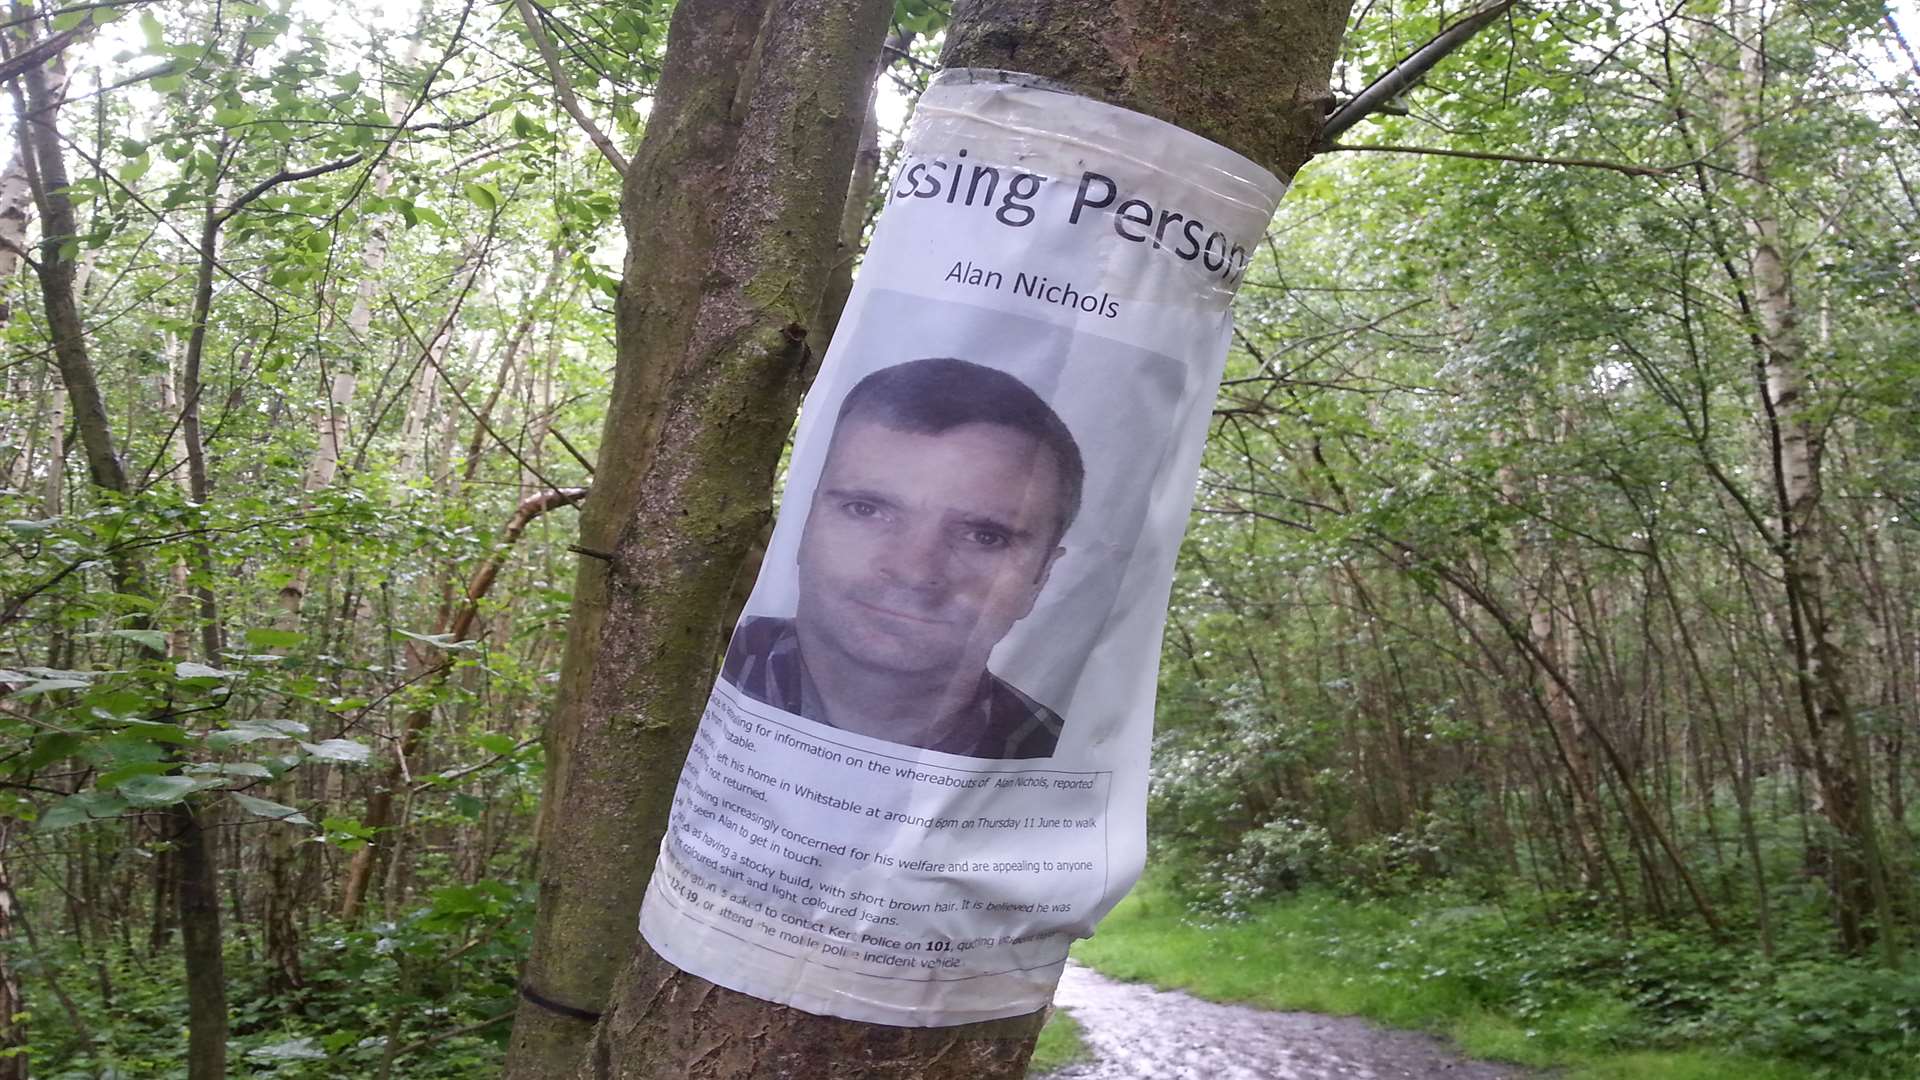 Missing person poster in Clowes Wood